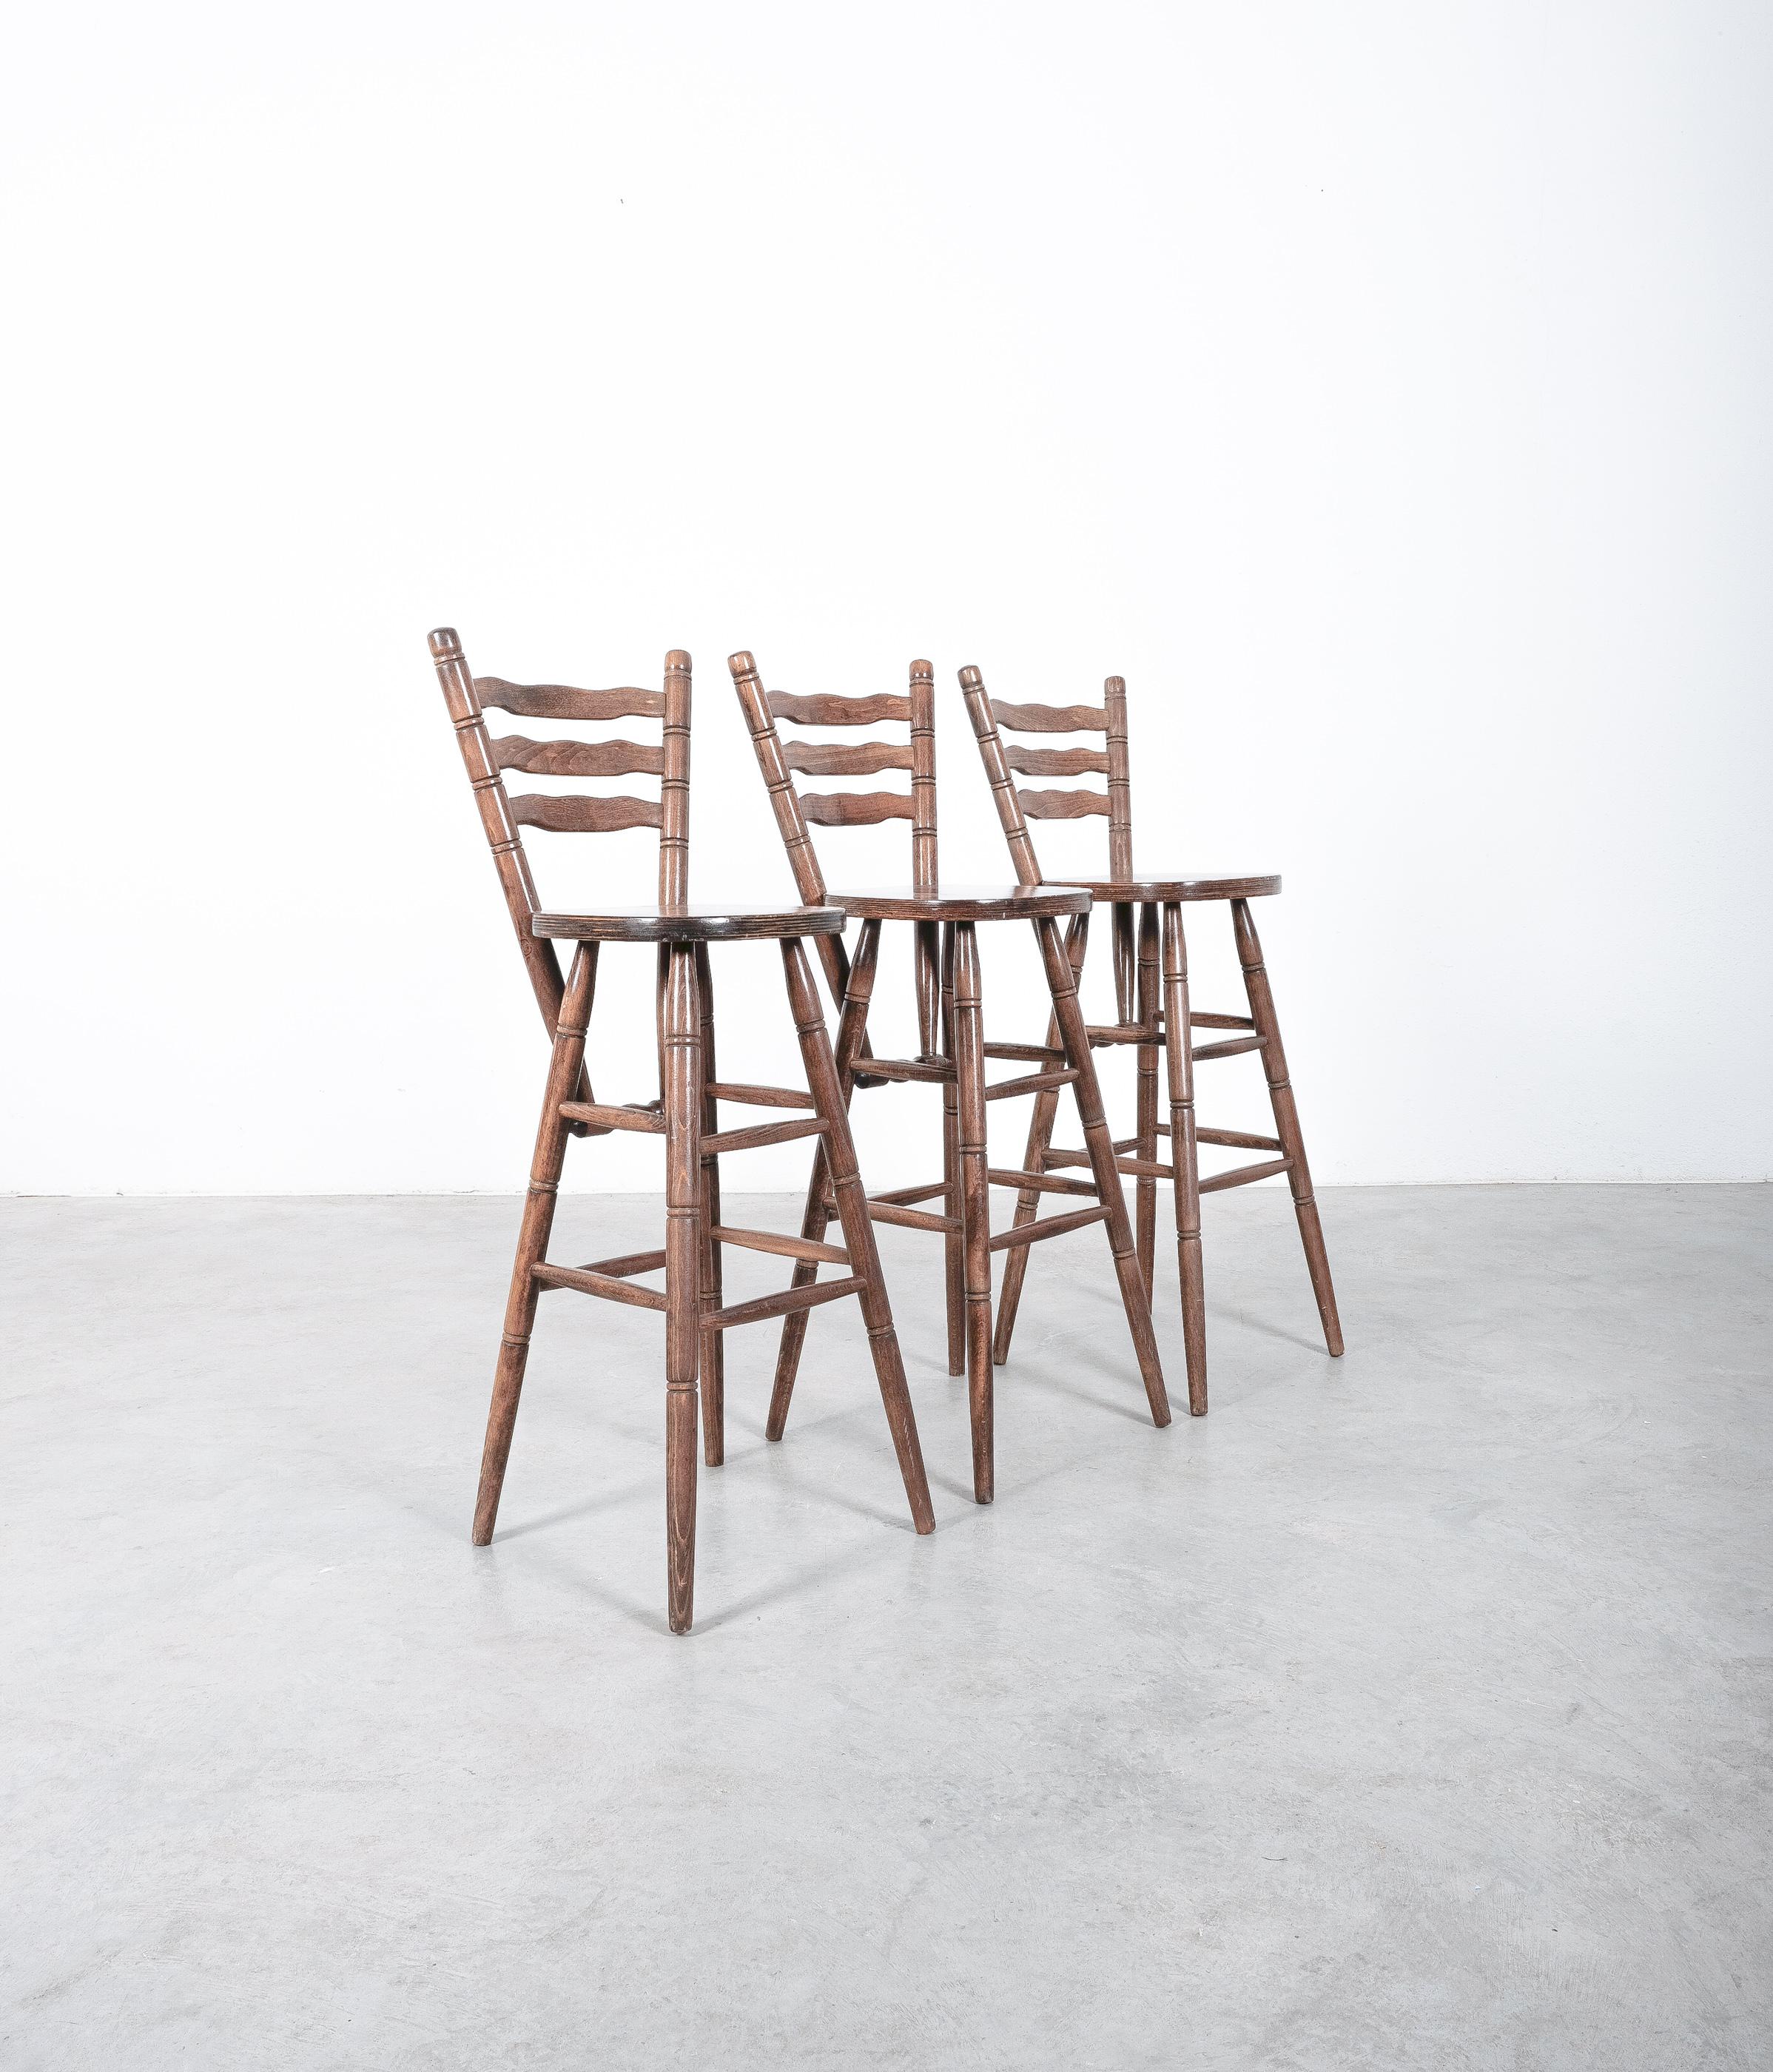 Rustic bar stools made from birch, circa 1970 - priced per stool.

Dimensions 44